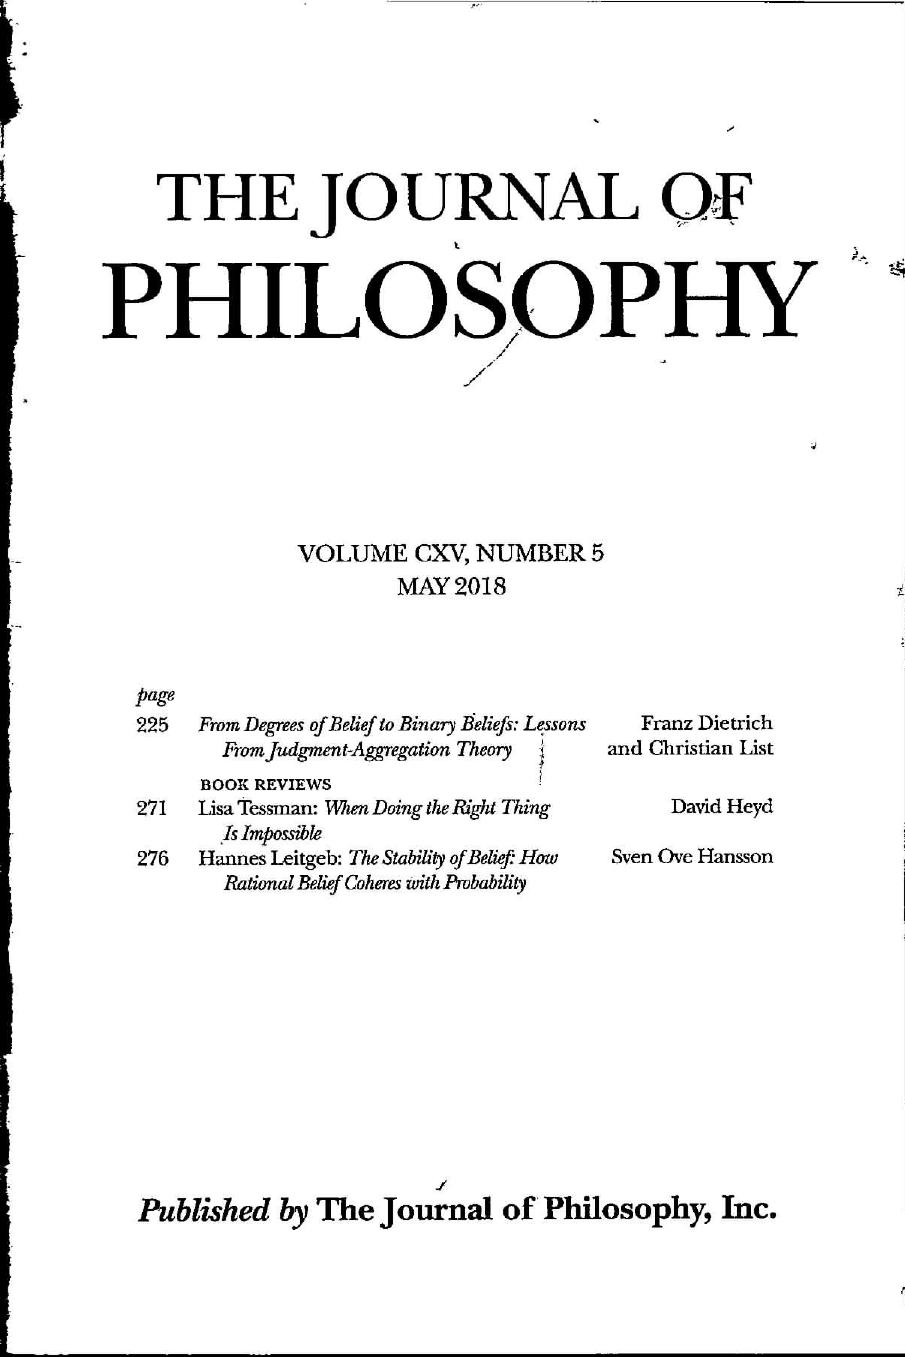 The Journal of Philosophy - Volume CXV, Number 5 - May 2018